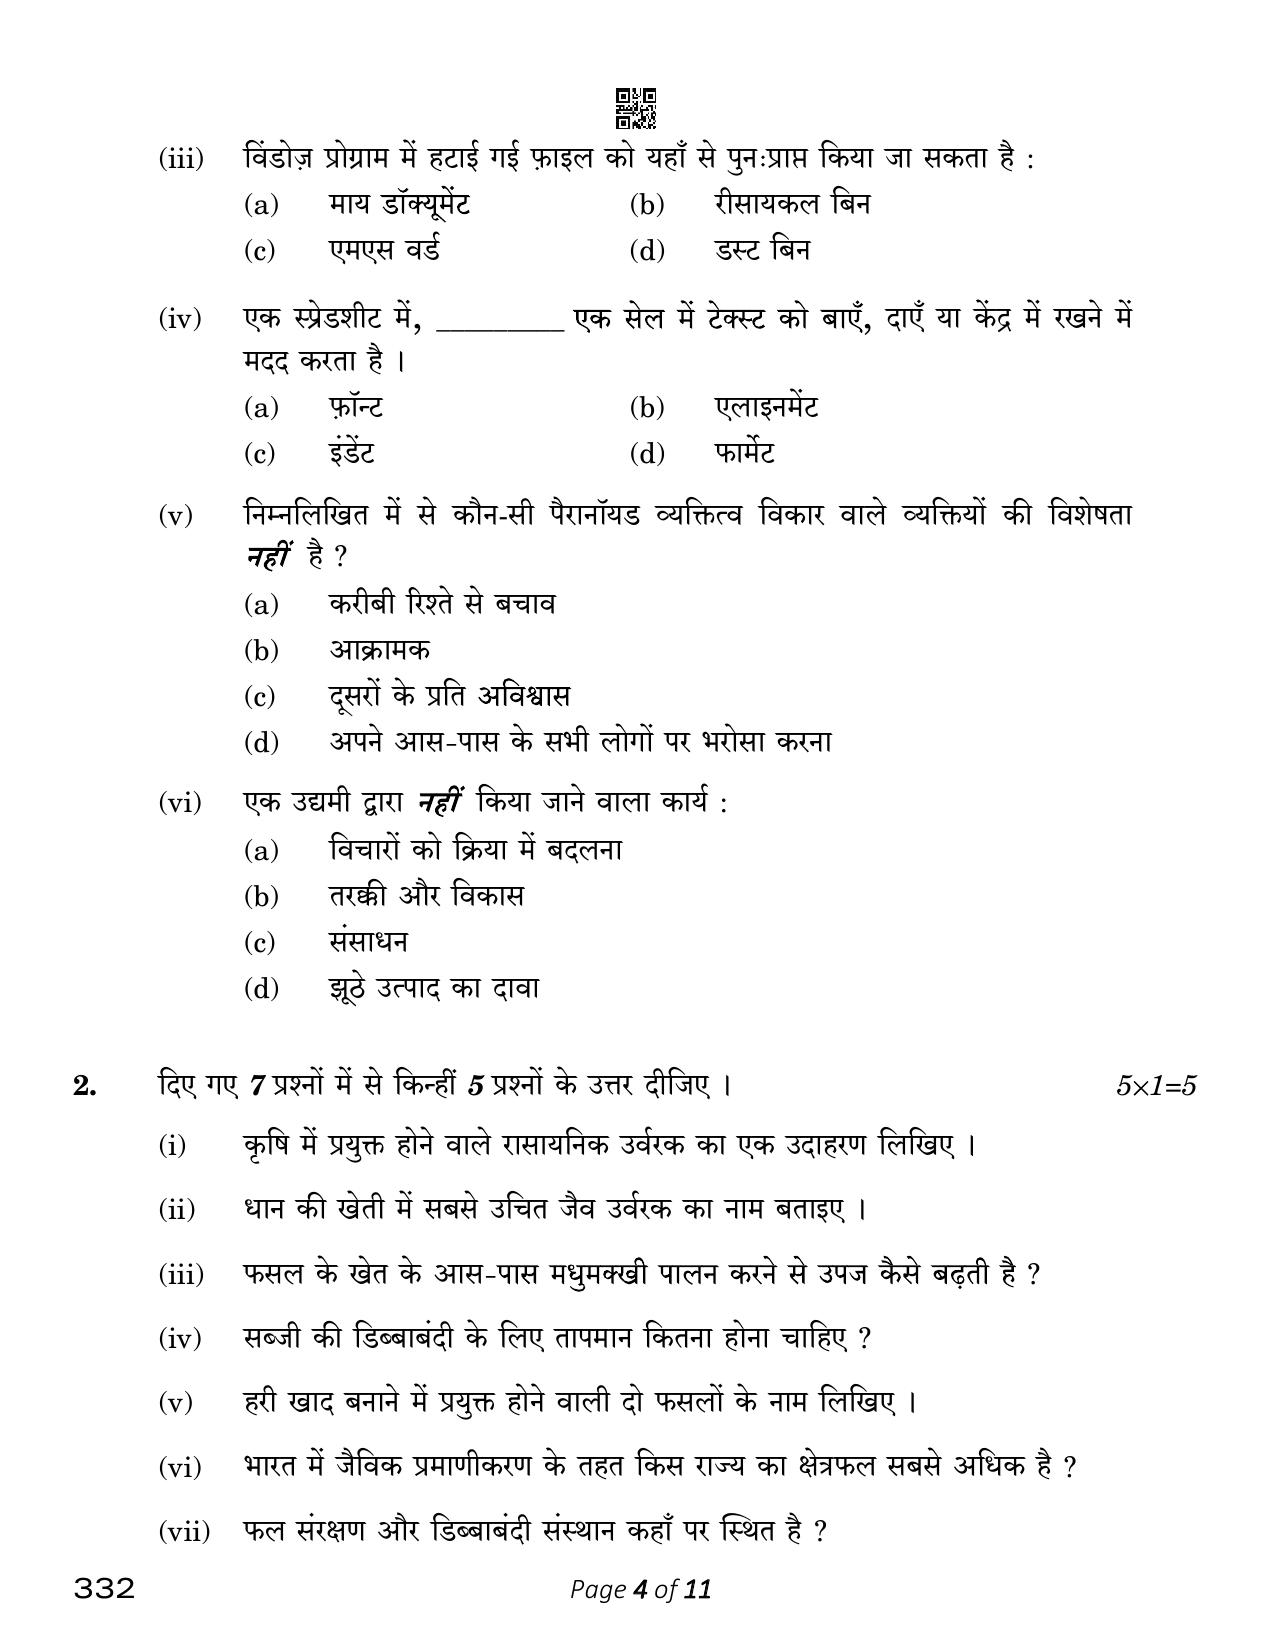 CBSE Class 12 Agriculture (Compartment) 2023 Question Paper - Page 4